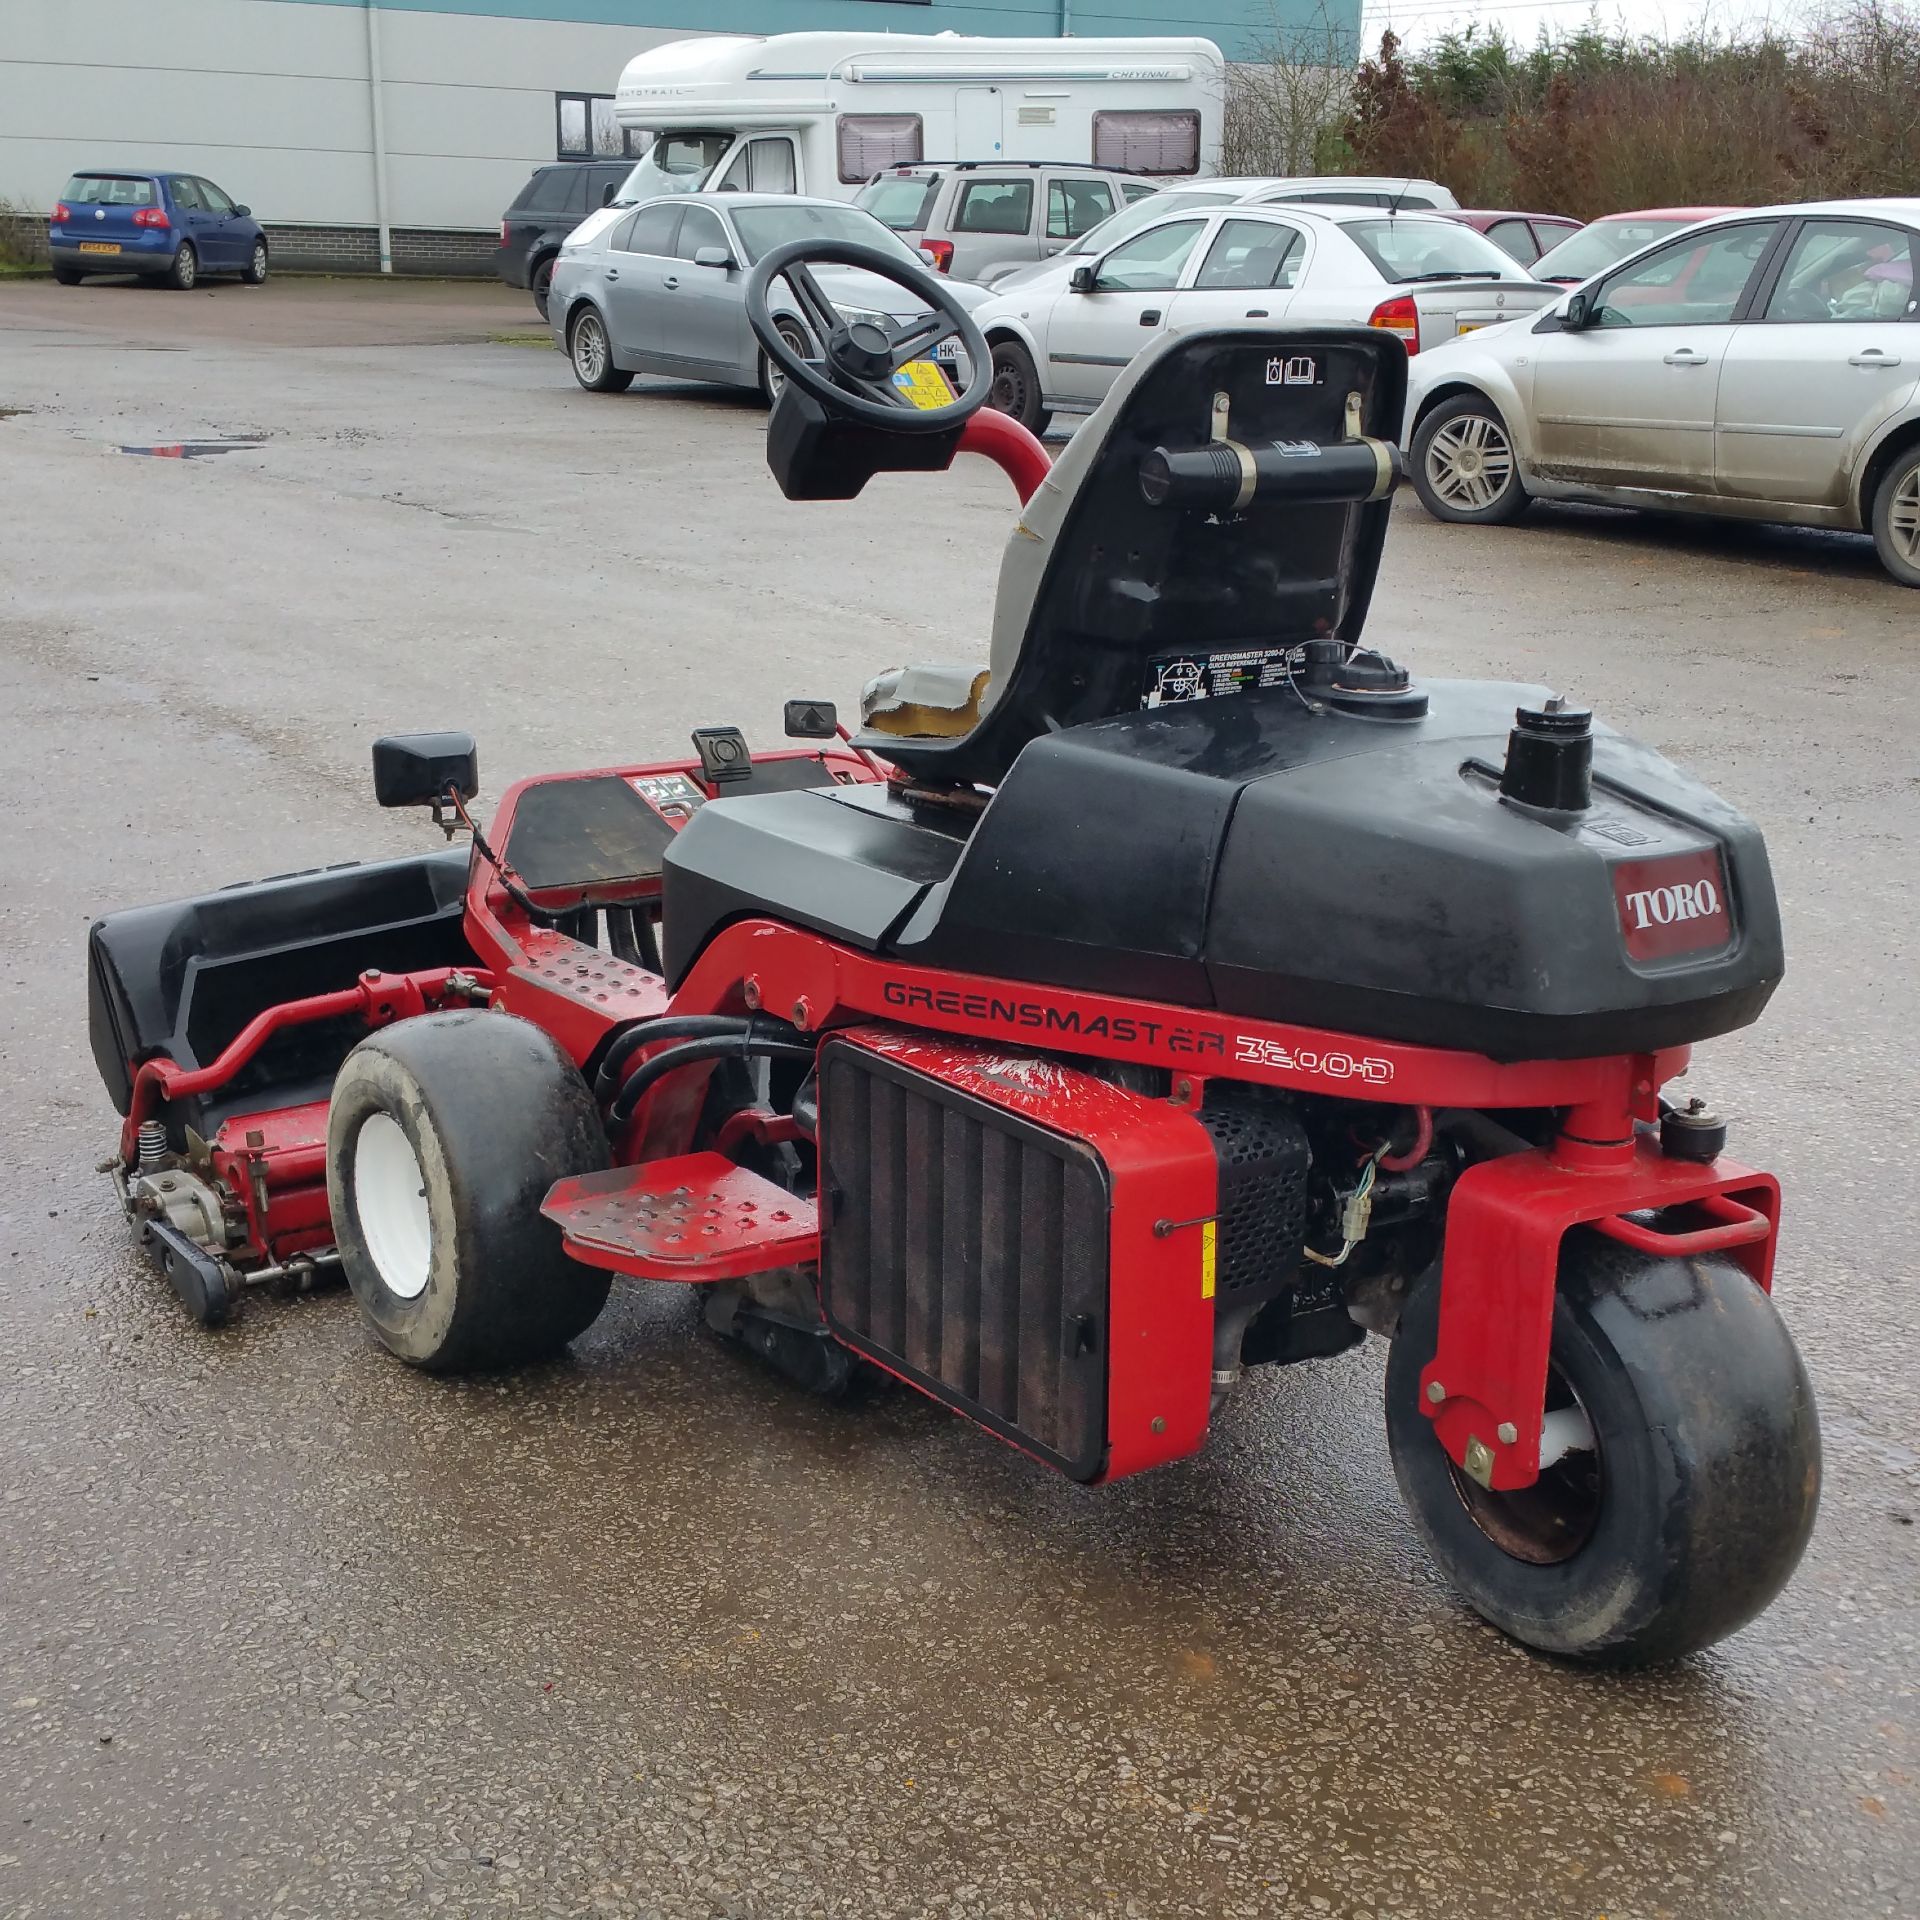 Toro Reelmaster 3200 mower   Triple cylinders   Hydrostatic drive   2 wheel drive   Collection - Image 4 of 6